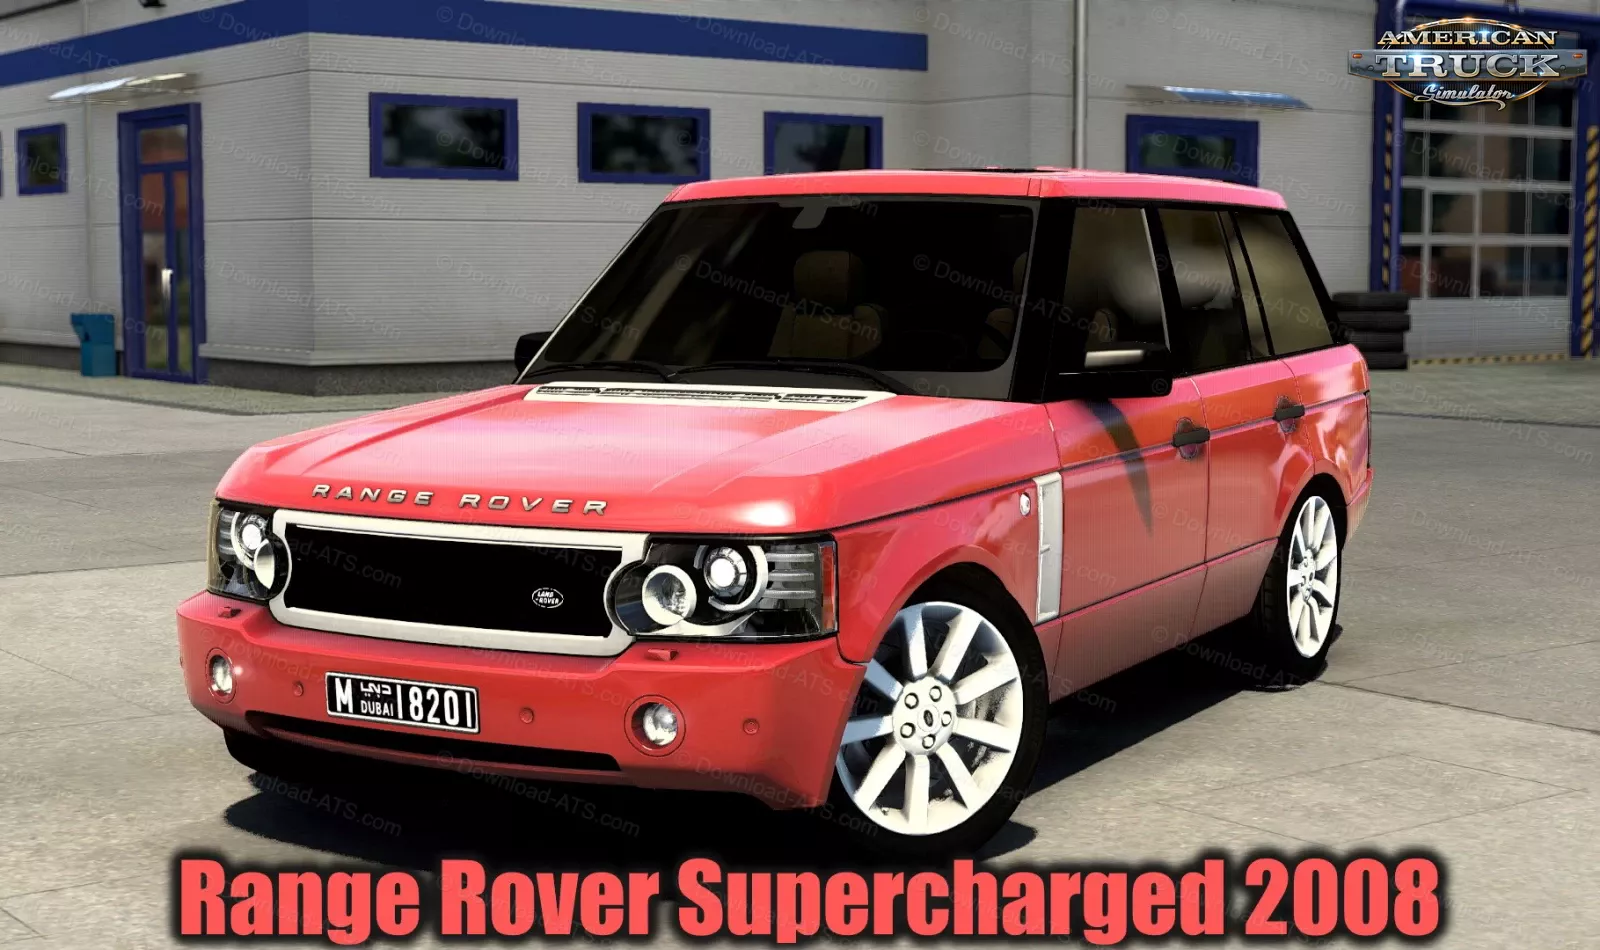 Range Rover Supercharged 2008 v7.8 (1.50.x) for ATS